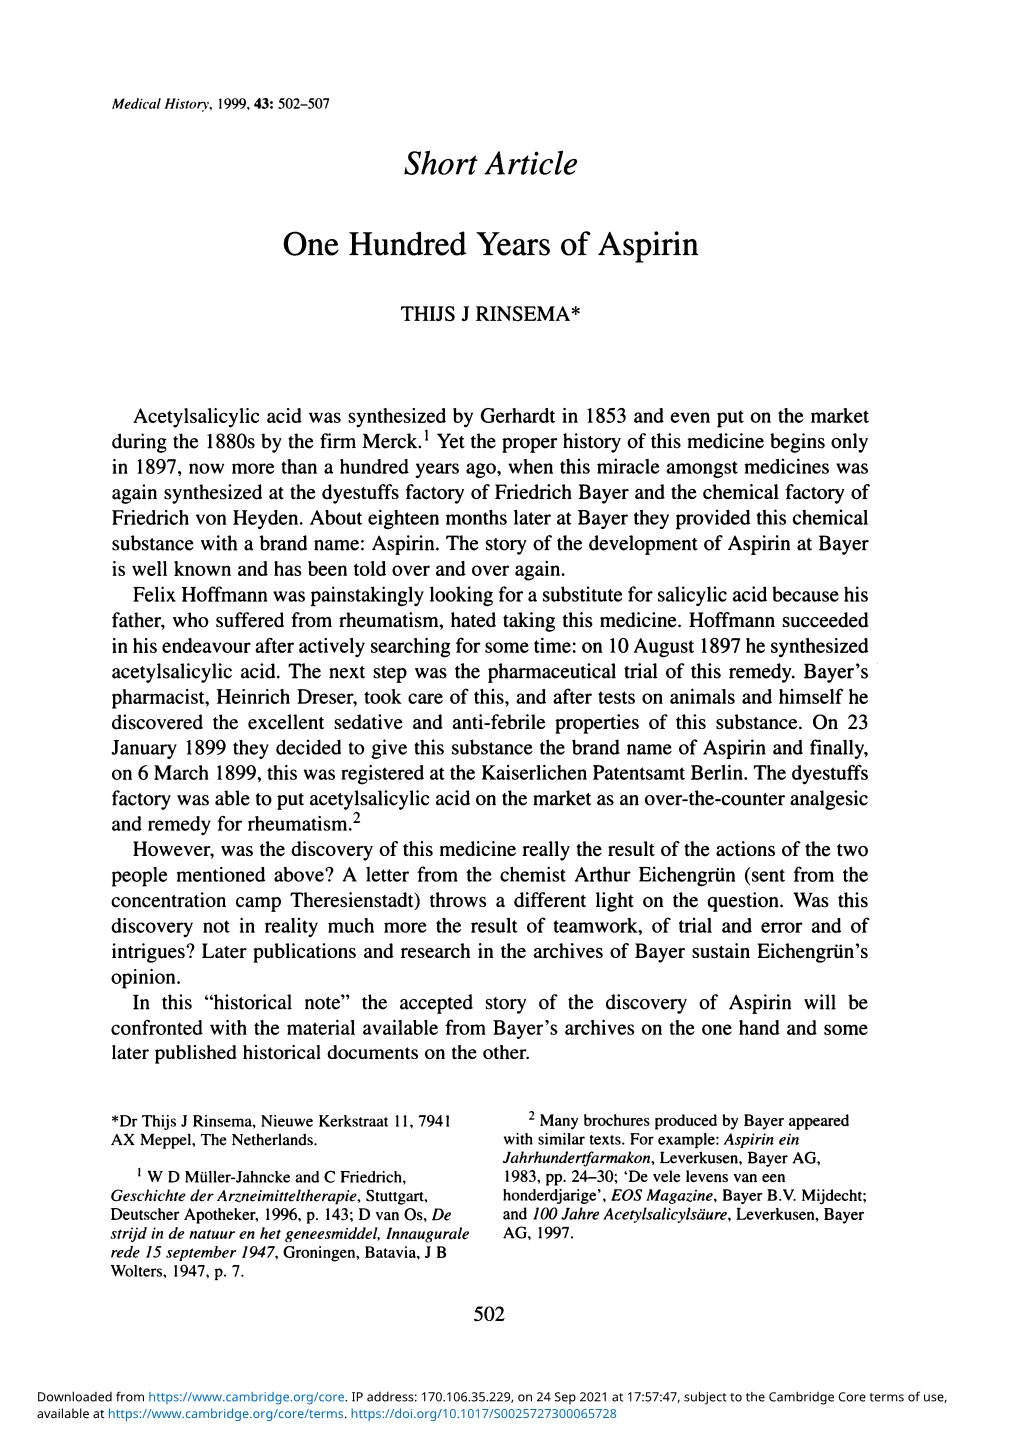 Short Article One Hundred Years of Aspirin